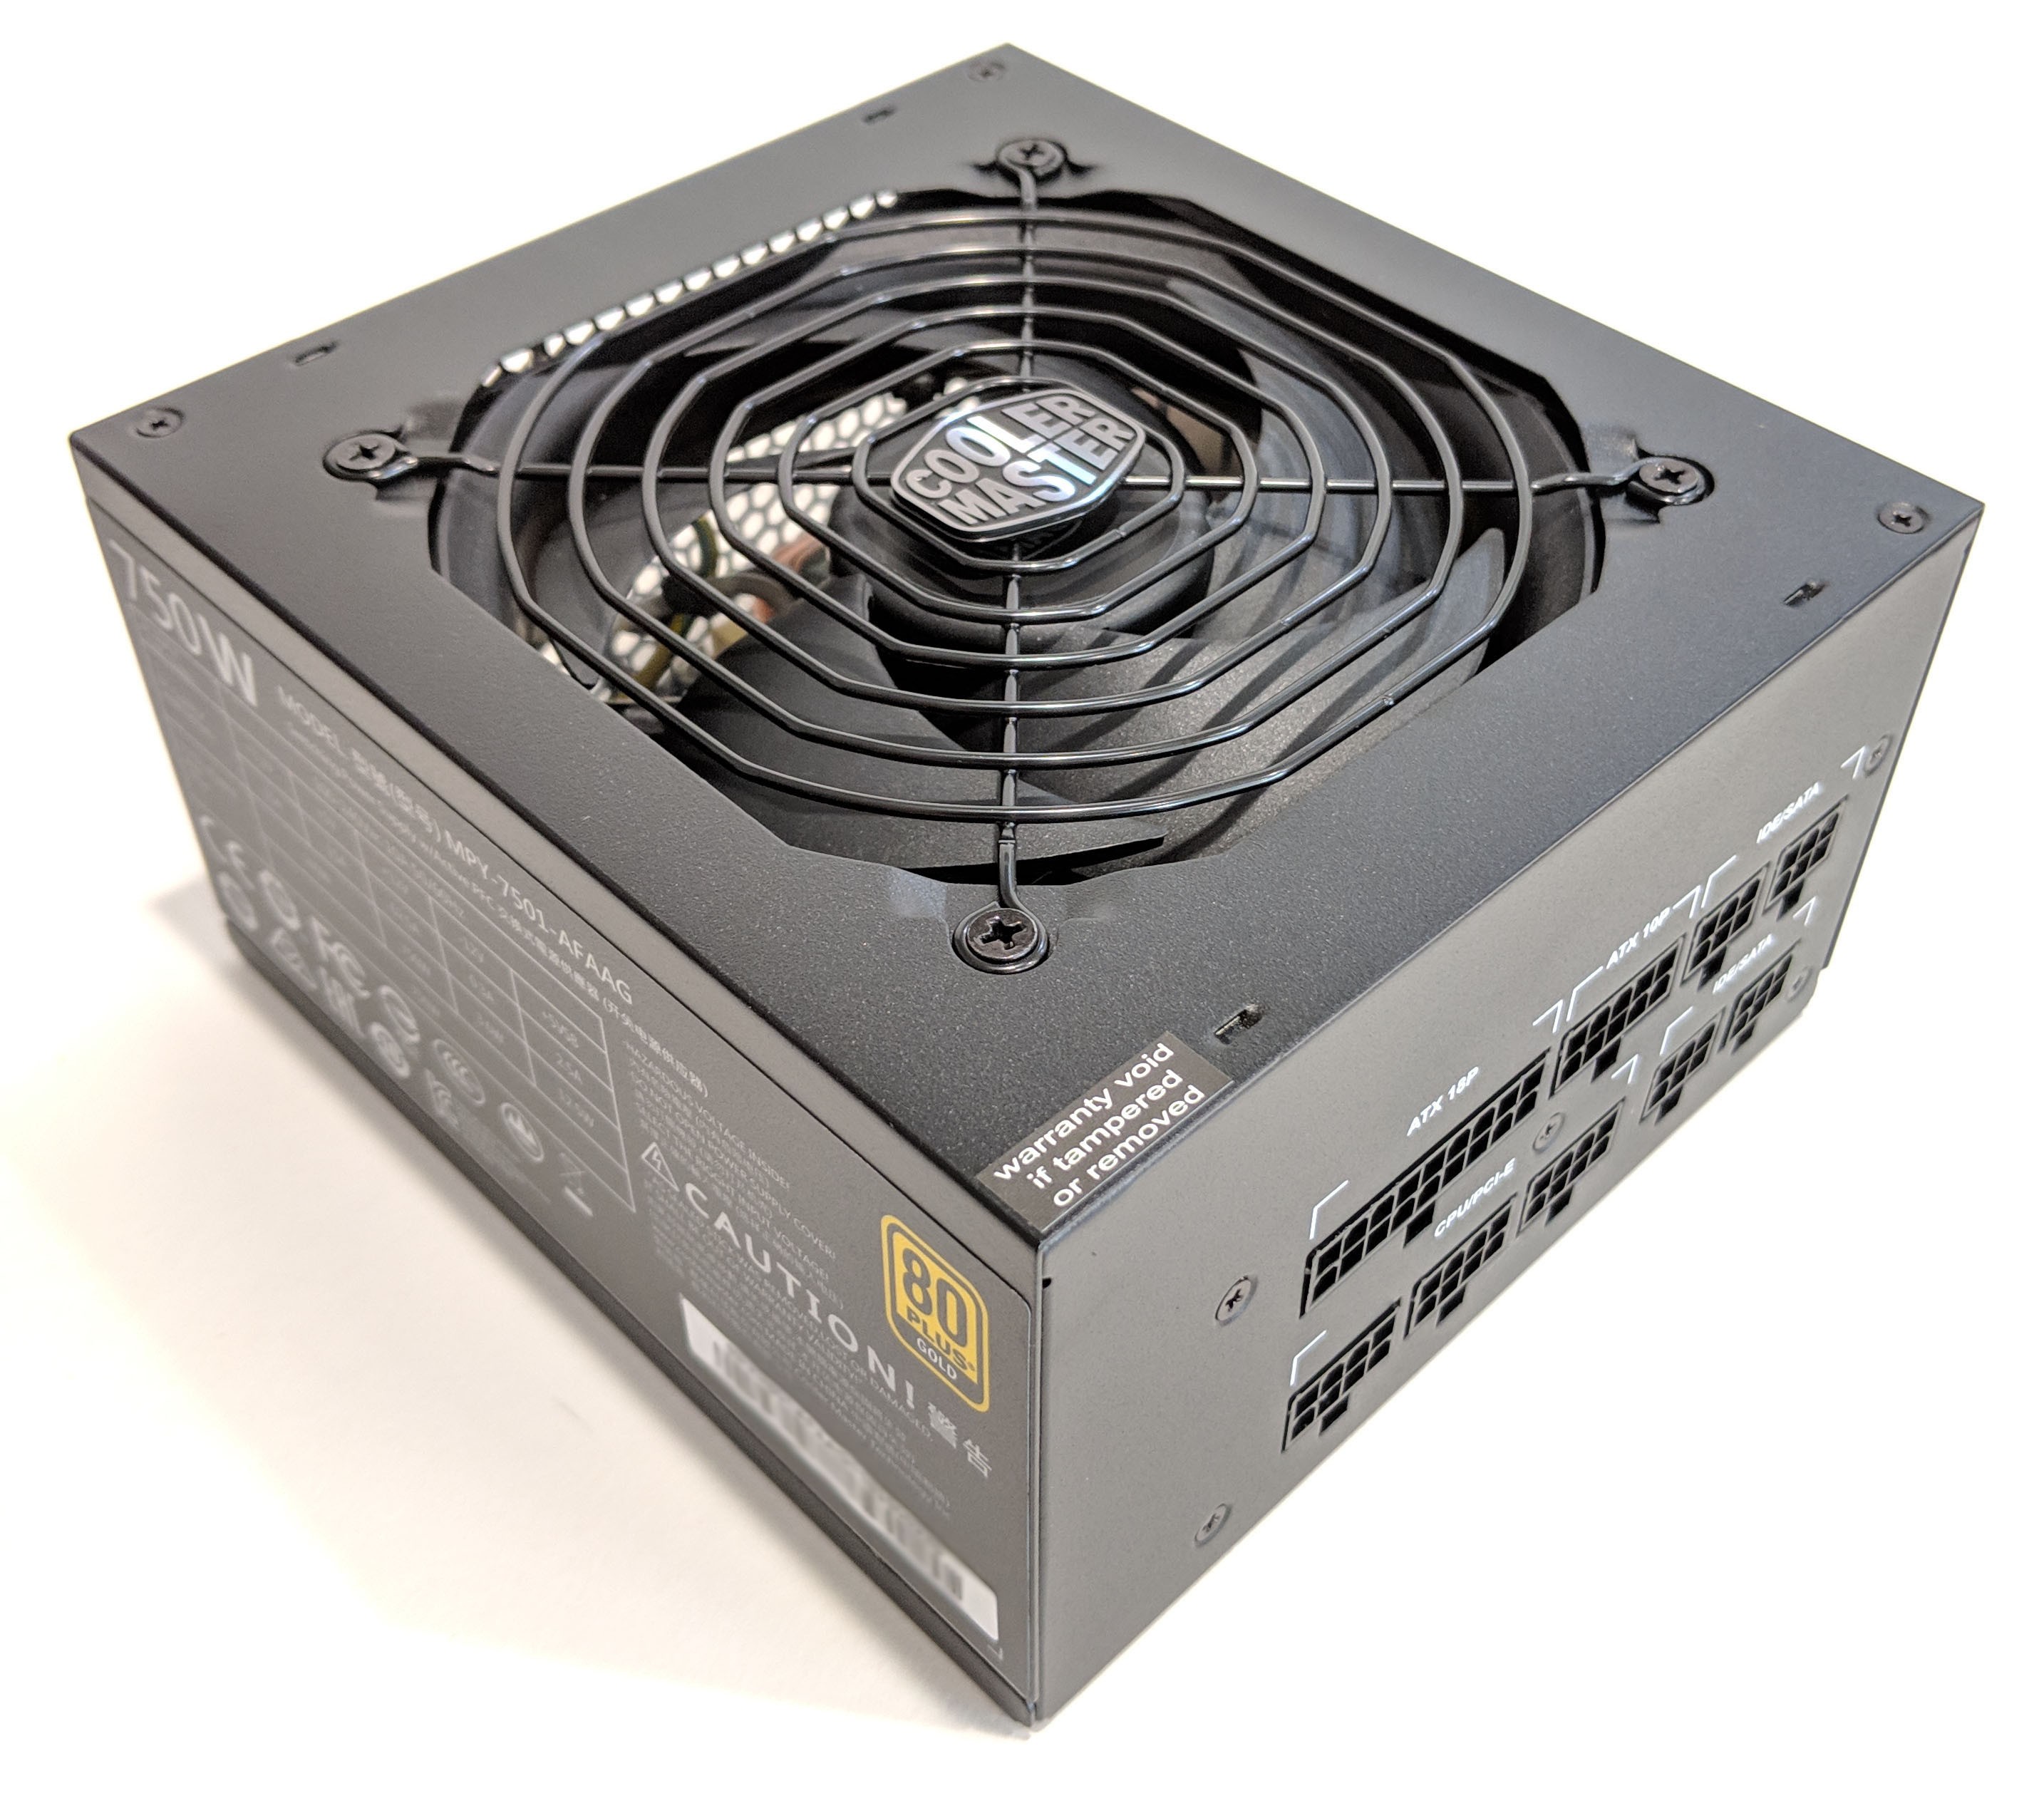 Cooler Master MWE Gold 750 Power Supply Review